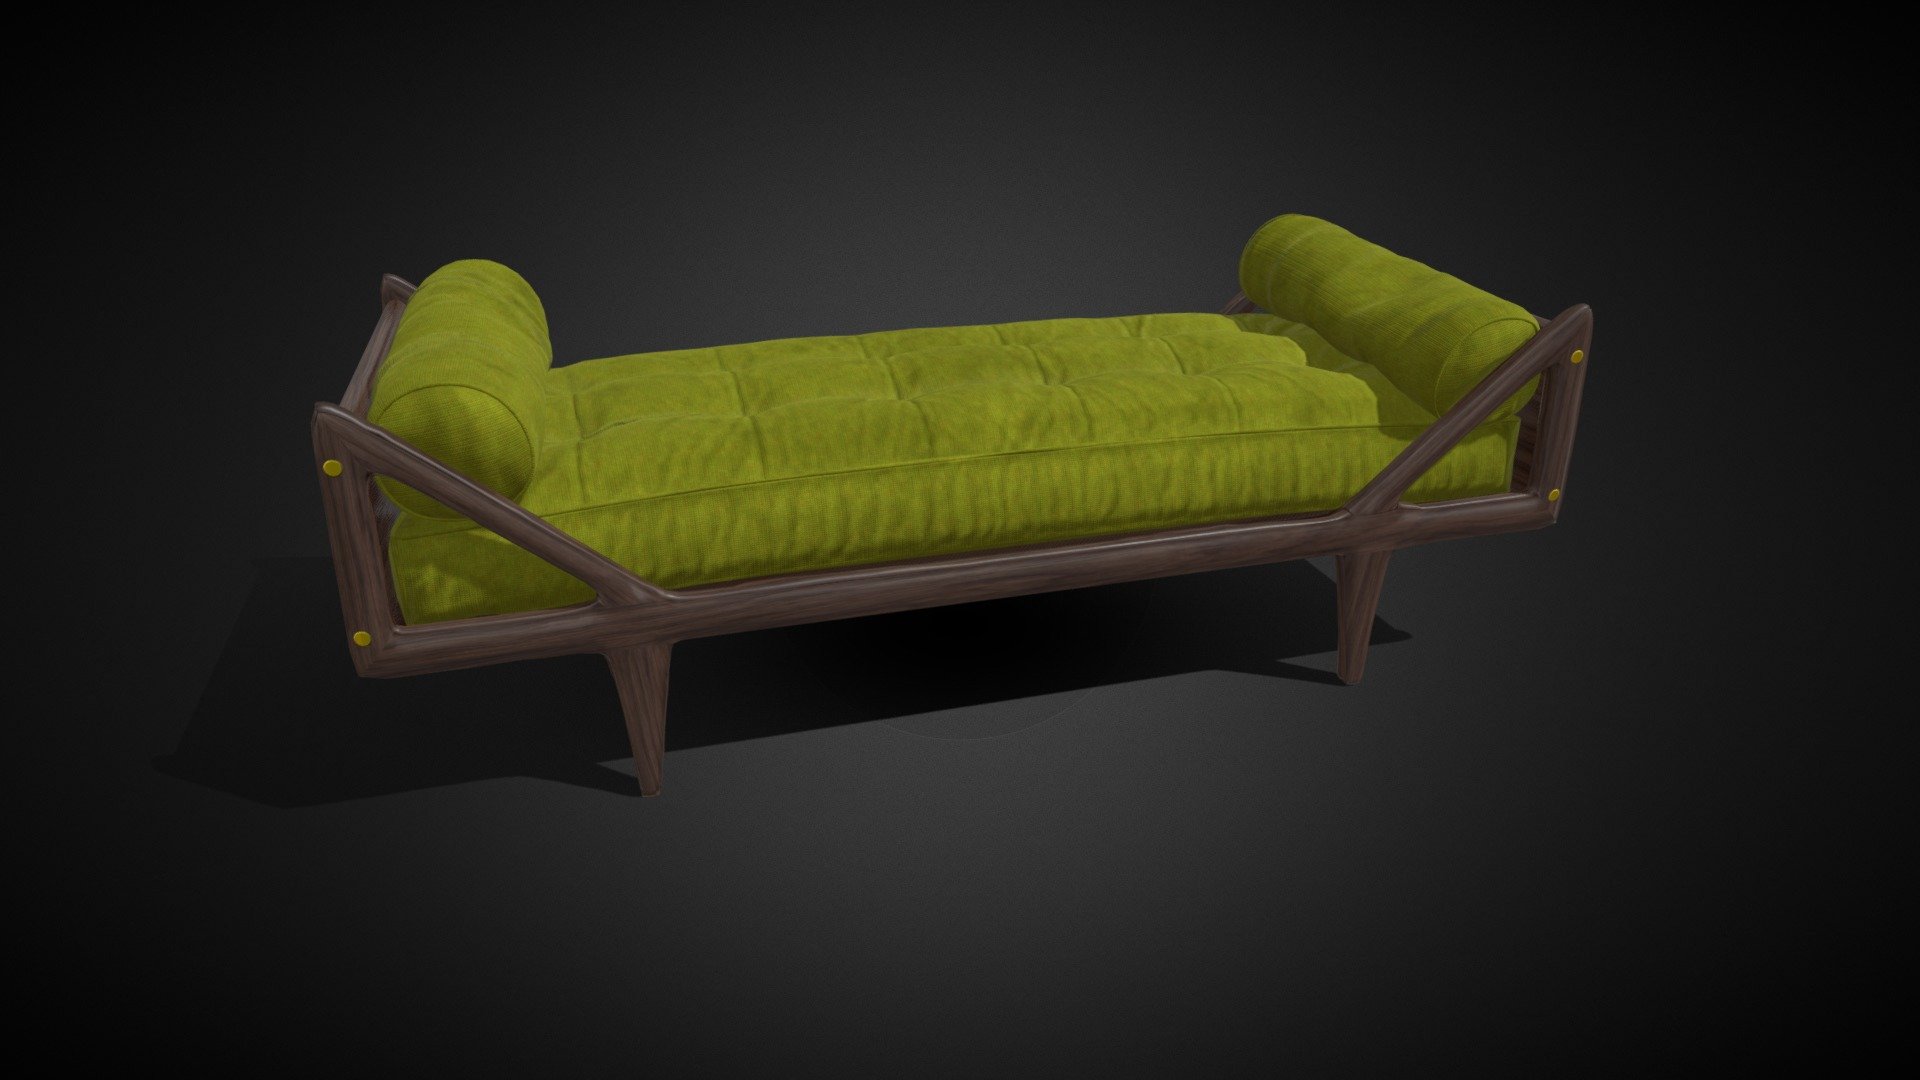 3d model of a Bench . (PBR texture)

This product is made in Blender and ready to render in Cycle. Unit setup is metres and the models are scaled to match real life objects. 

The model comes with textures and materials and is positioned in the center of the coordinates system.


No additional plugin is needed to open the model.




Notes:



Geometry: Polygonal

Textures: Yes 

Rigged: No

Animated: No

UV Mapped: Yes

Unwrapped UVs: Yes, non-overlapping


Bake normal map




Note: don't forget to take a few seconds to rate this product, your support will allow me to continue working .
Thanks in advance for your help and happy blending!




Hope you like it! Thank you!



My youtube channel : https://www.youtube.com/toss90 - Bench - Buy Royalty Free 3D model by Toss90 3d model